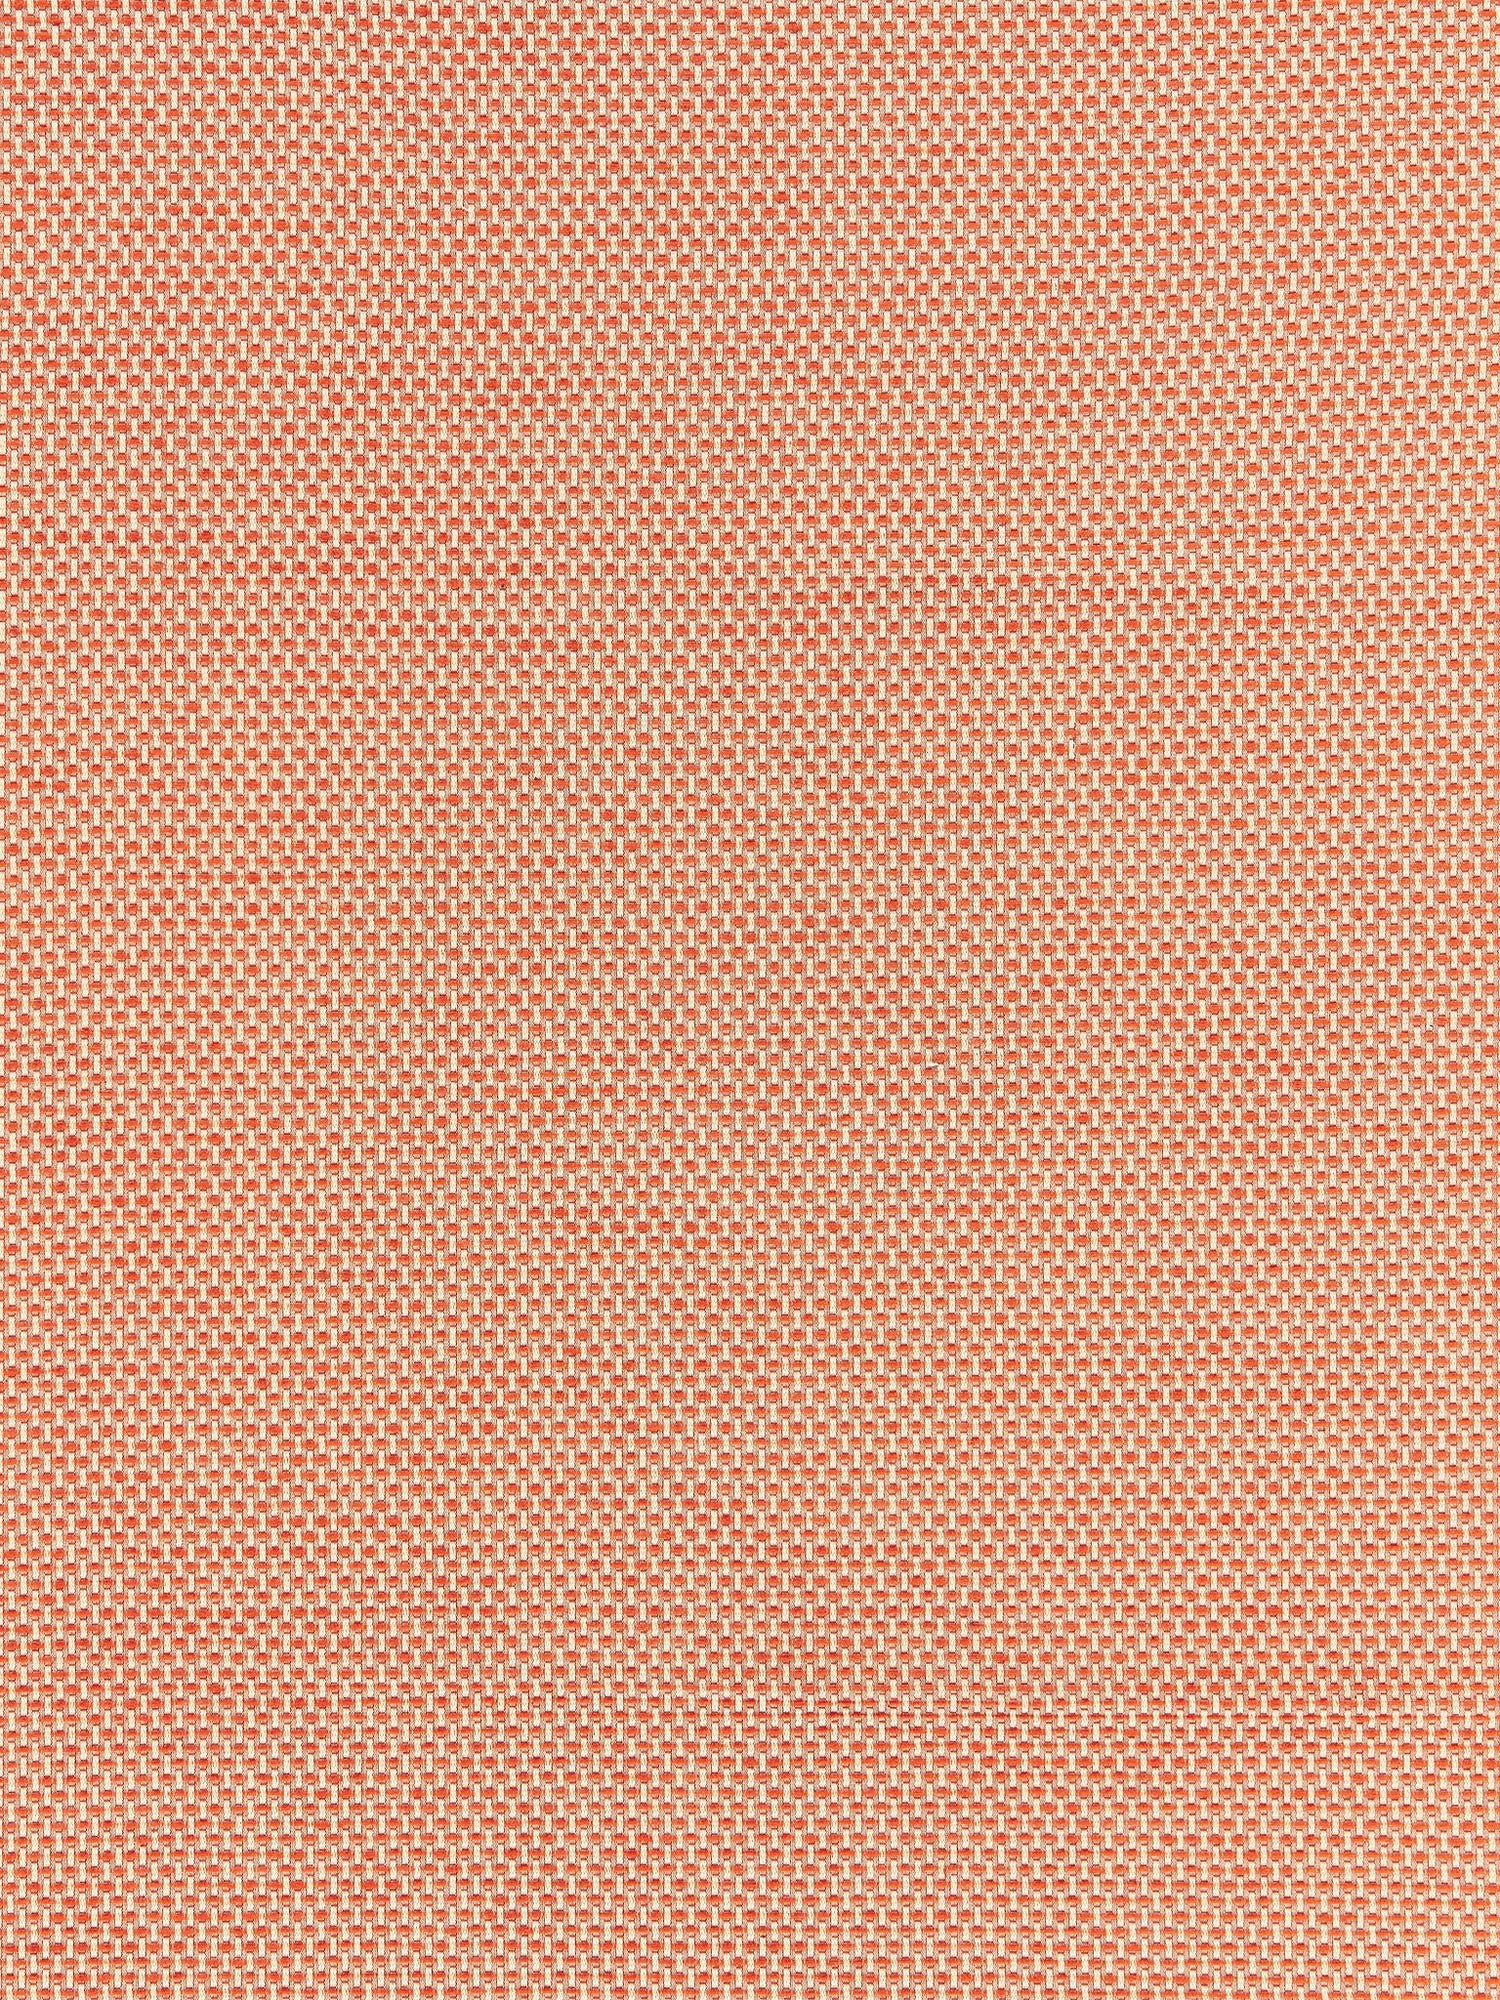 Berkshire Weave fabric in mandarin color - pattern number BK 0007K65115 - by Scalamandre in the Old World Weavers collection